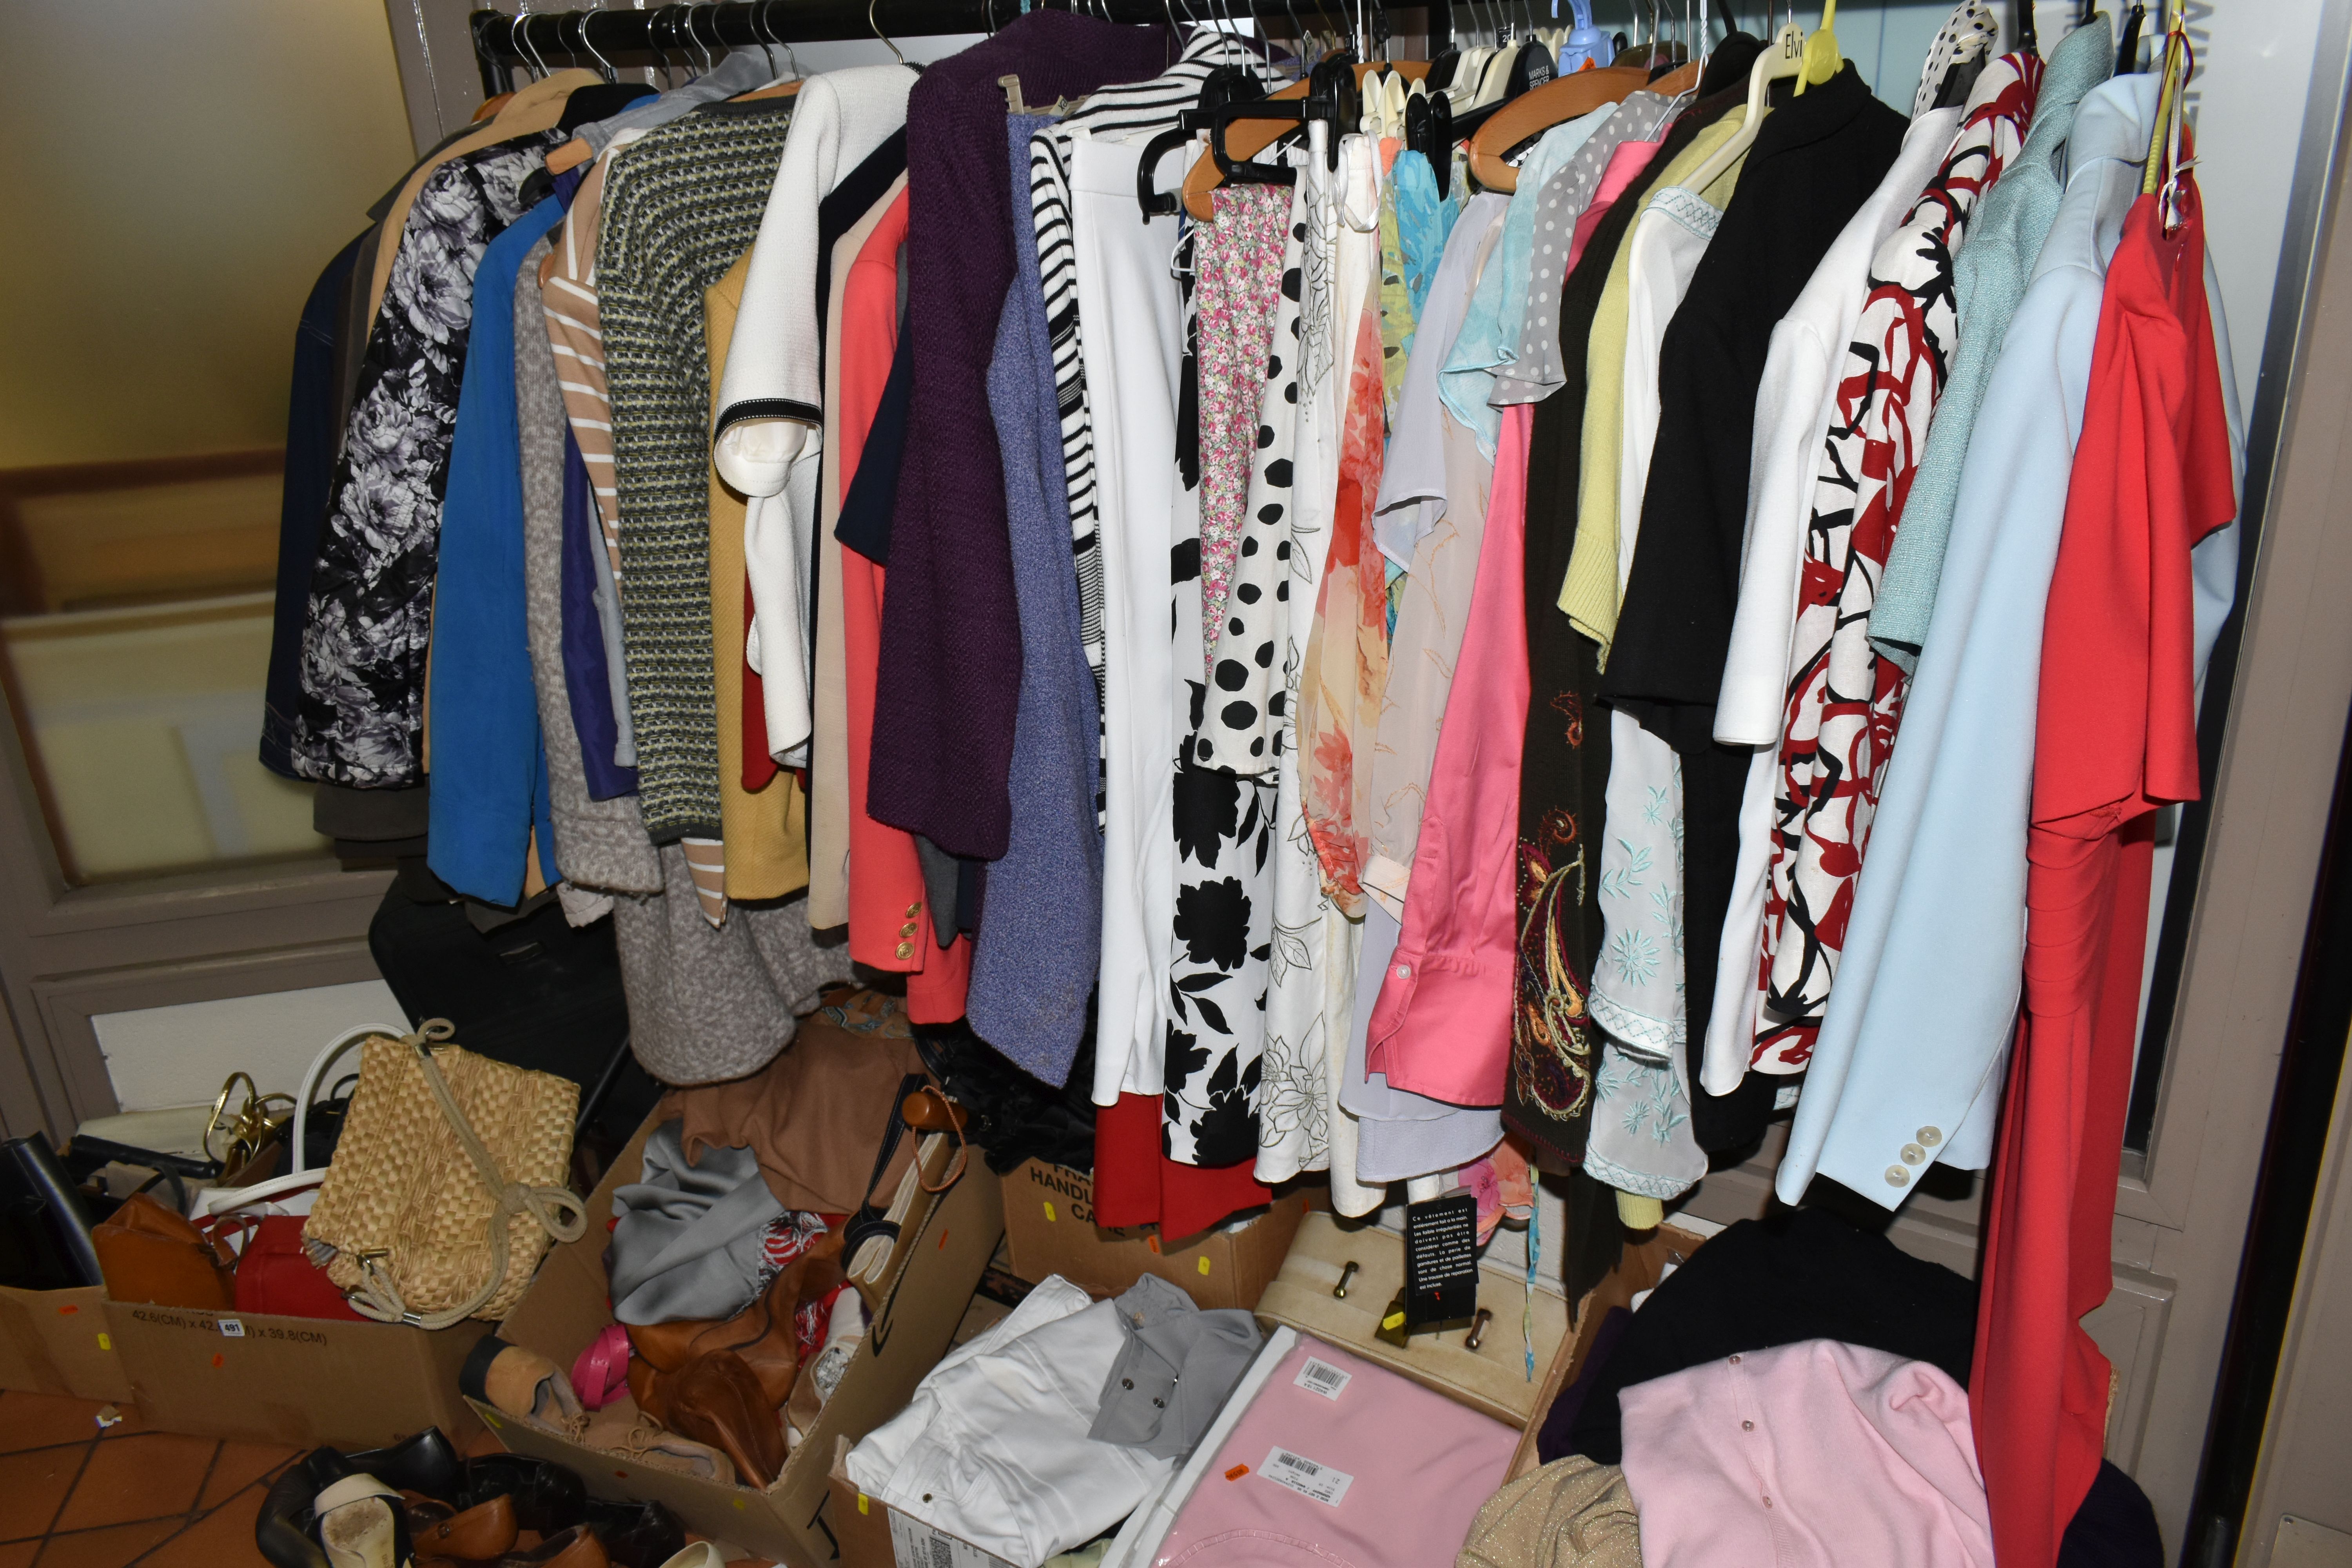 A QUANTITY OF LADIES' CLOTHING AND ACCESSORIES ETC, to include jackets, skirts, trousers, coats,